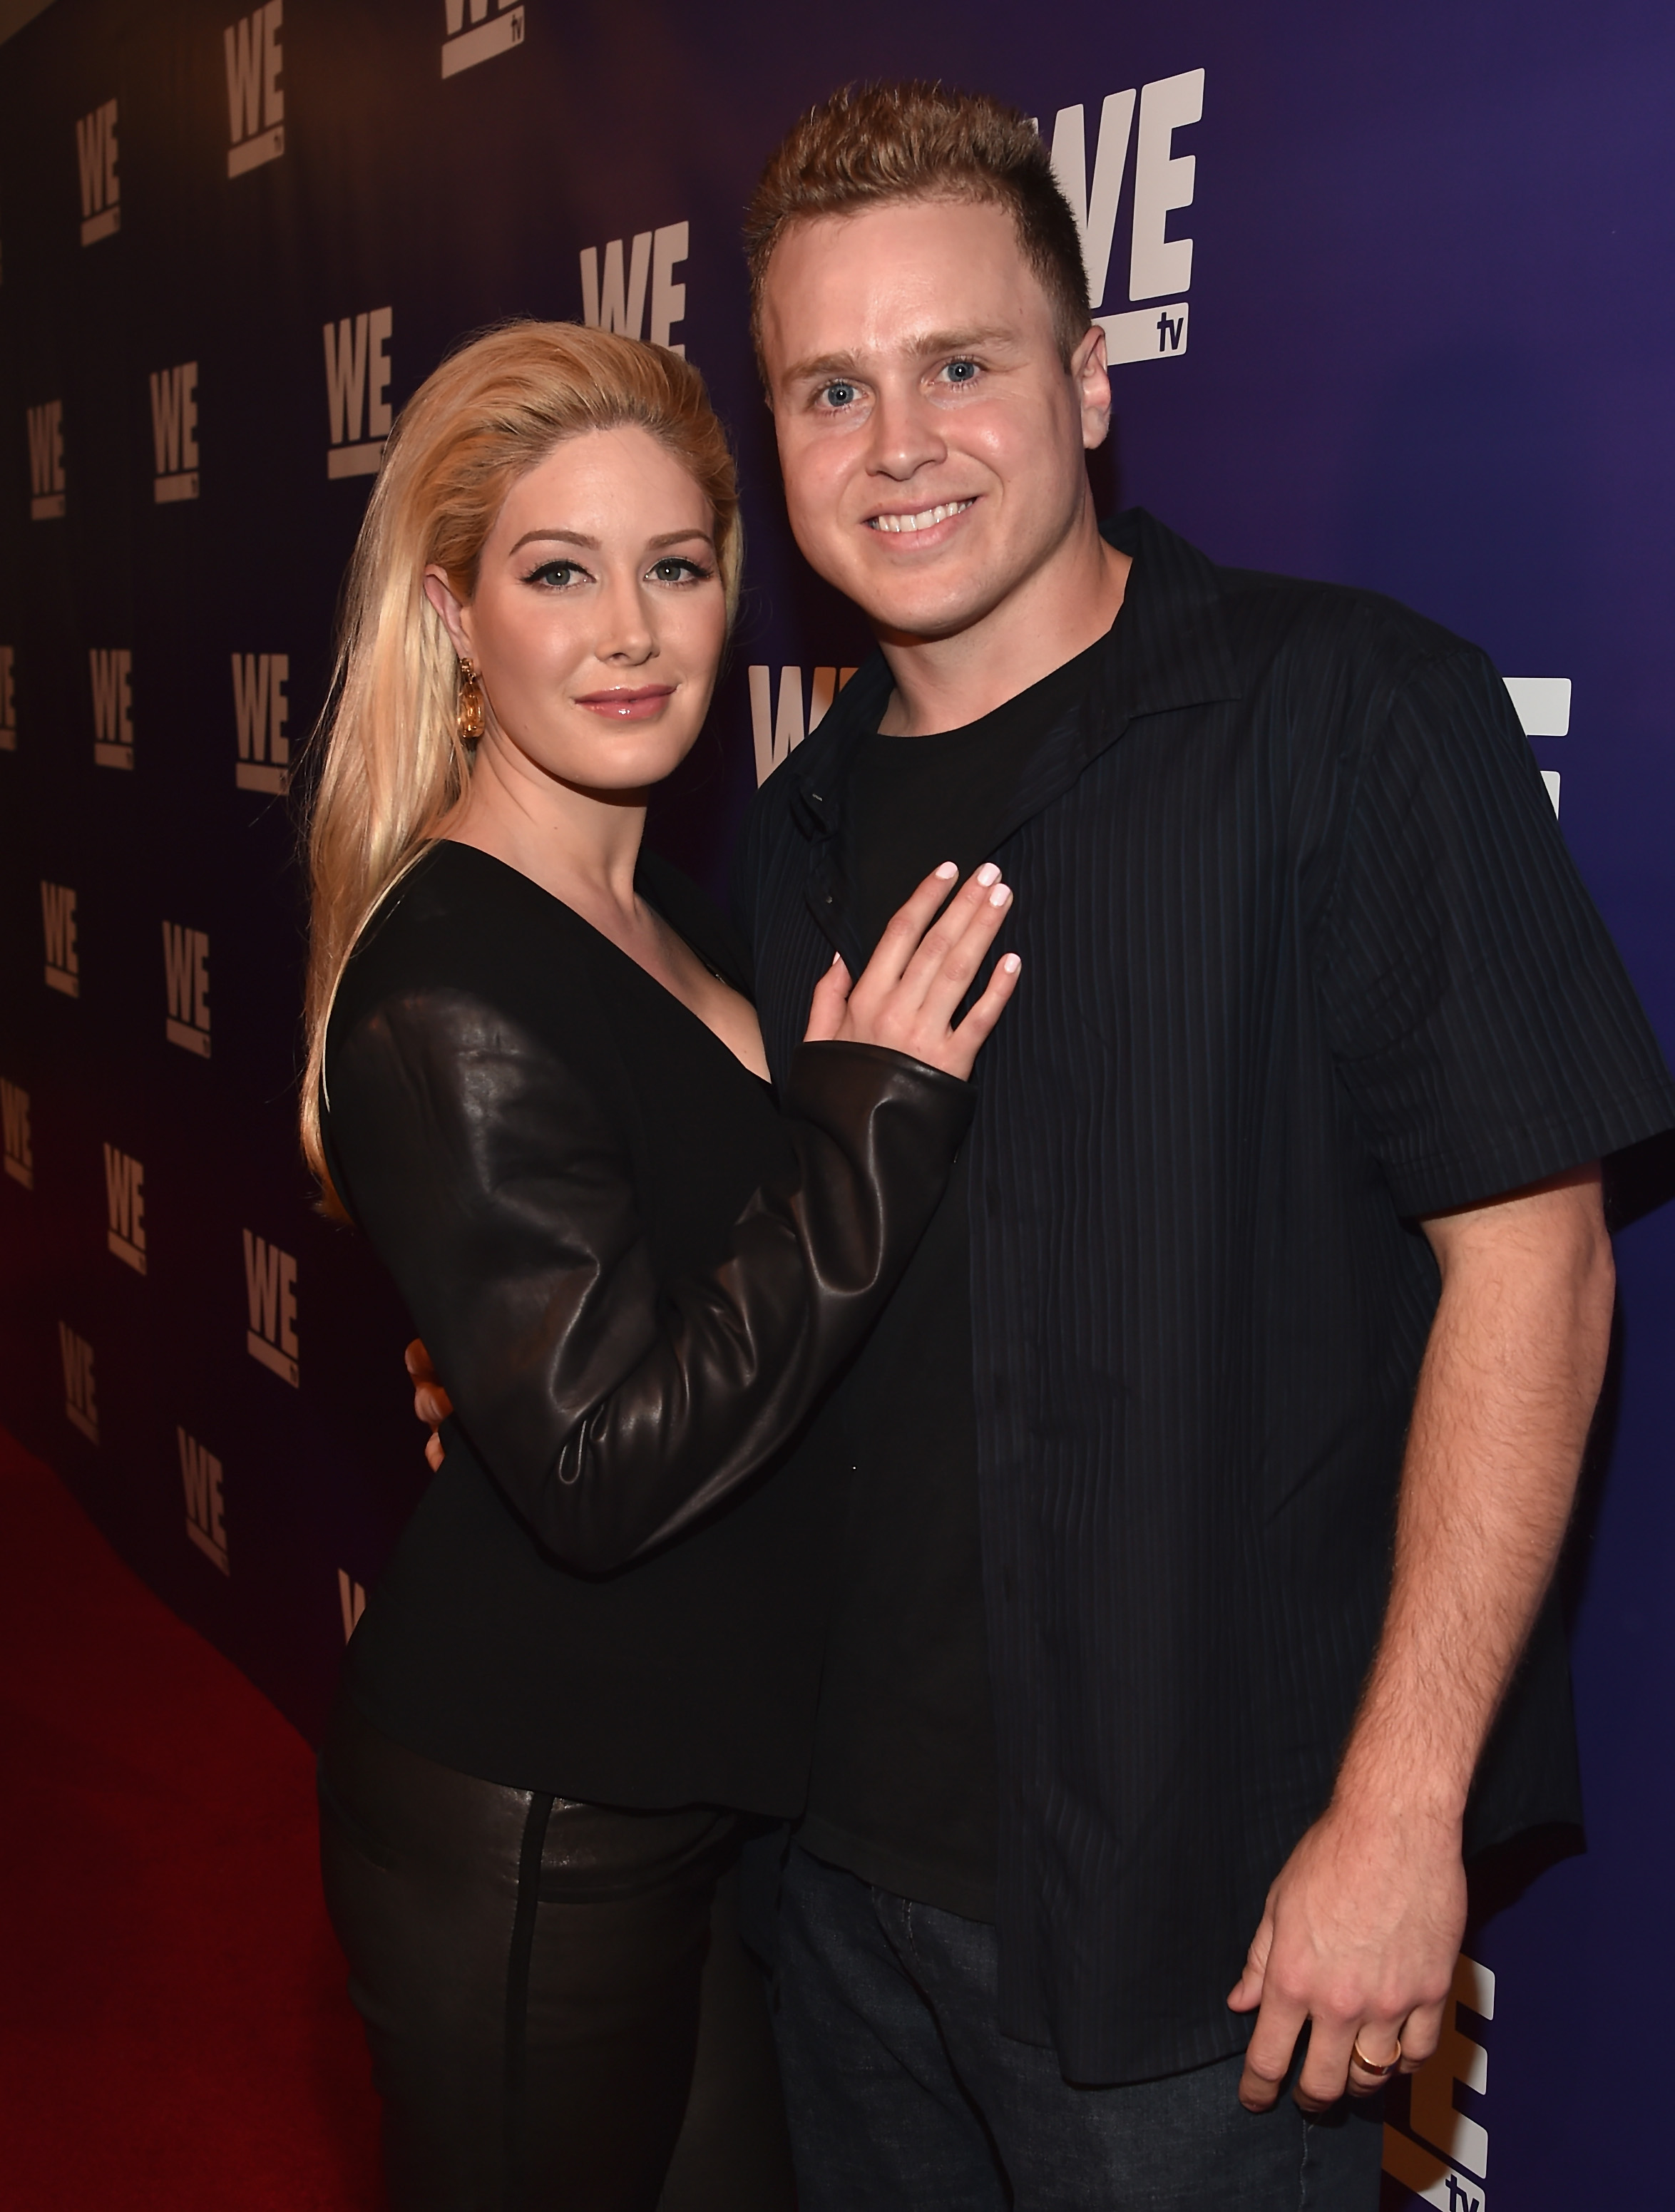 17 Things Heidi Montag and Spencer Pratt Should, Under No